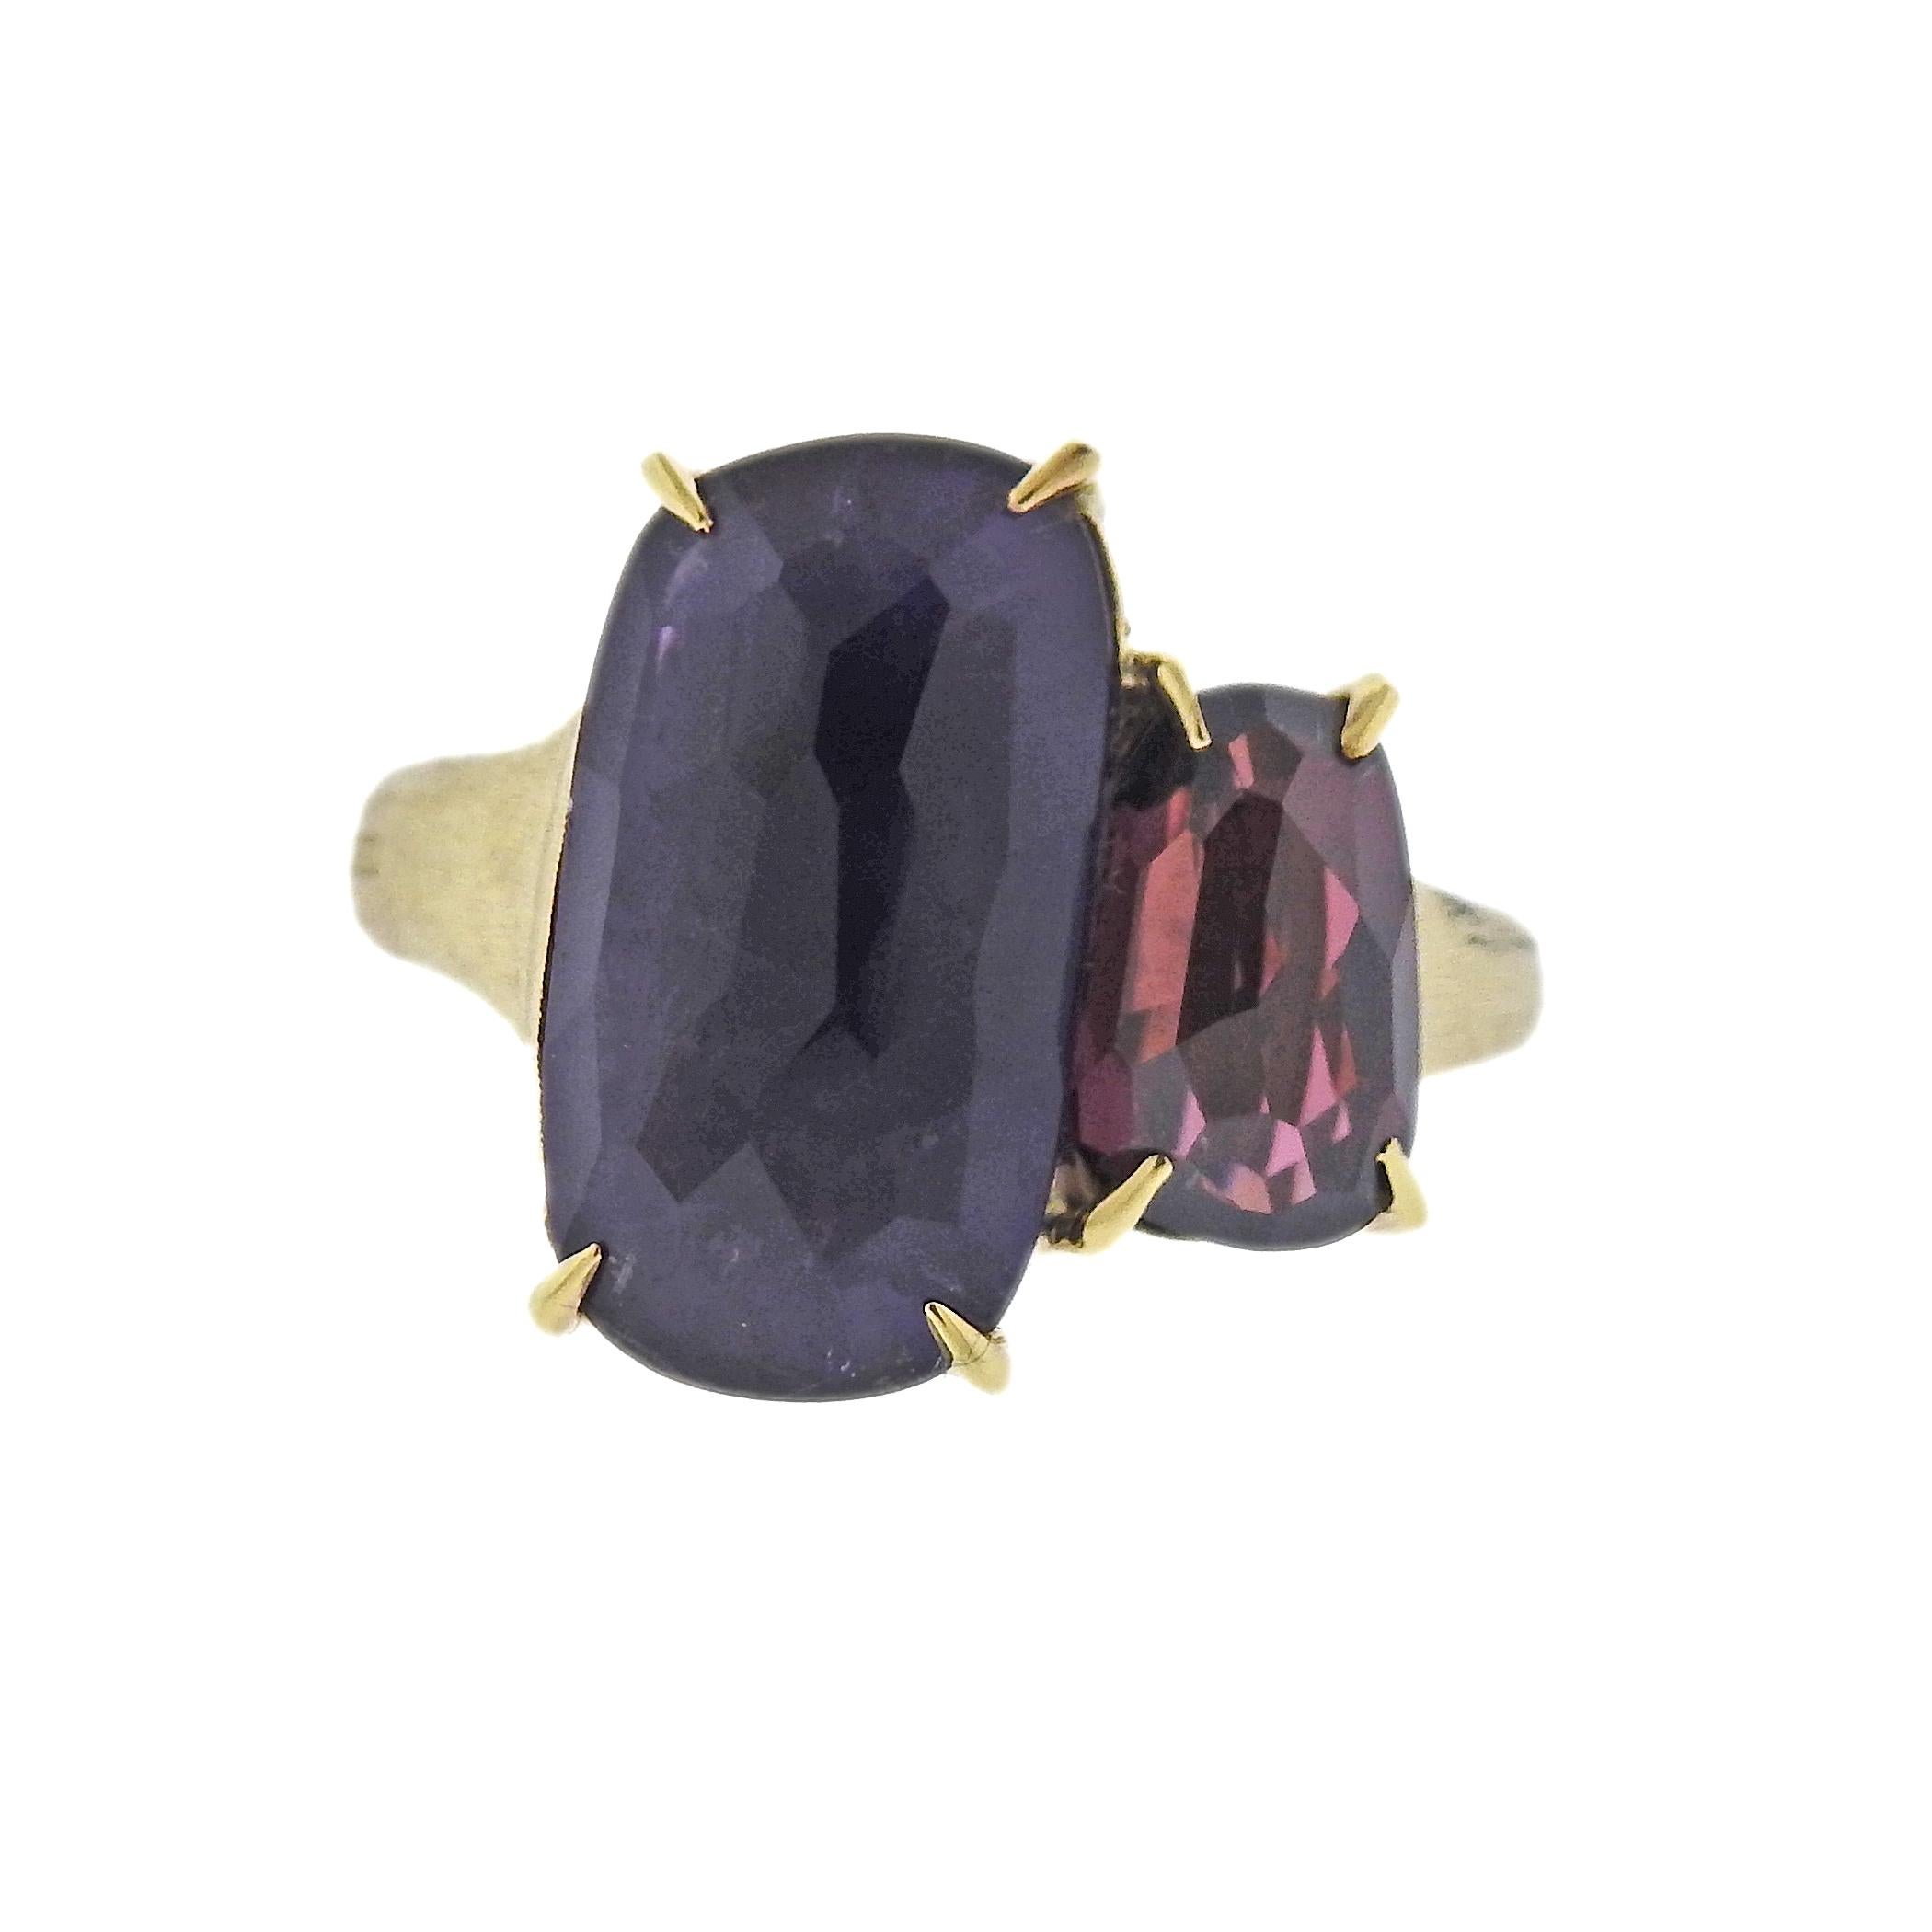 Marco Bicego Murano collection 18K gold large ring set with amethyst and rhodolite gemstones. Ring top measures 32mm x 27mm and available in size 7 1/4. Marked: Marco Bicego, Made in Italy, 750. Weight is 13.2 grams.